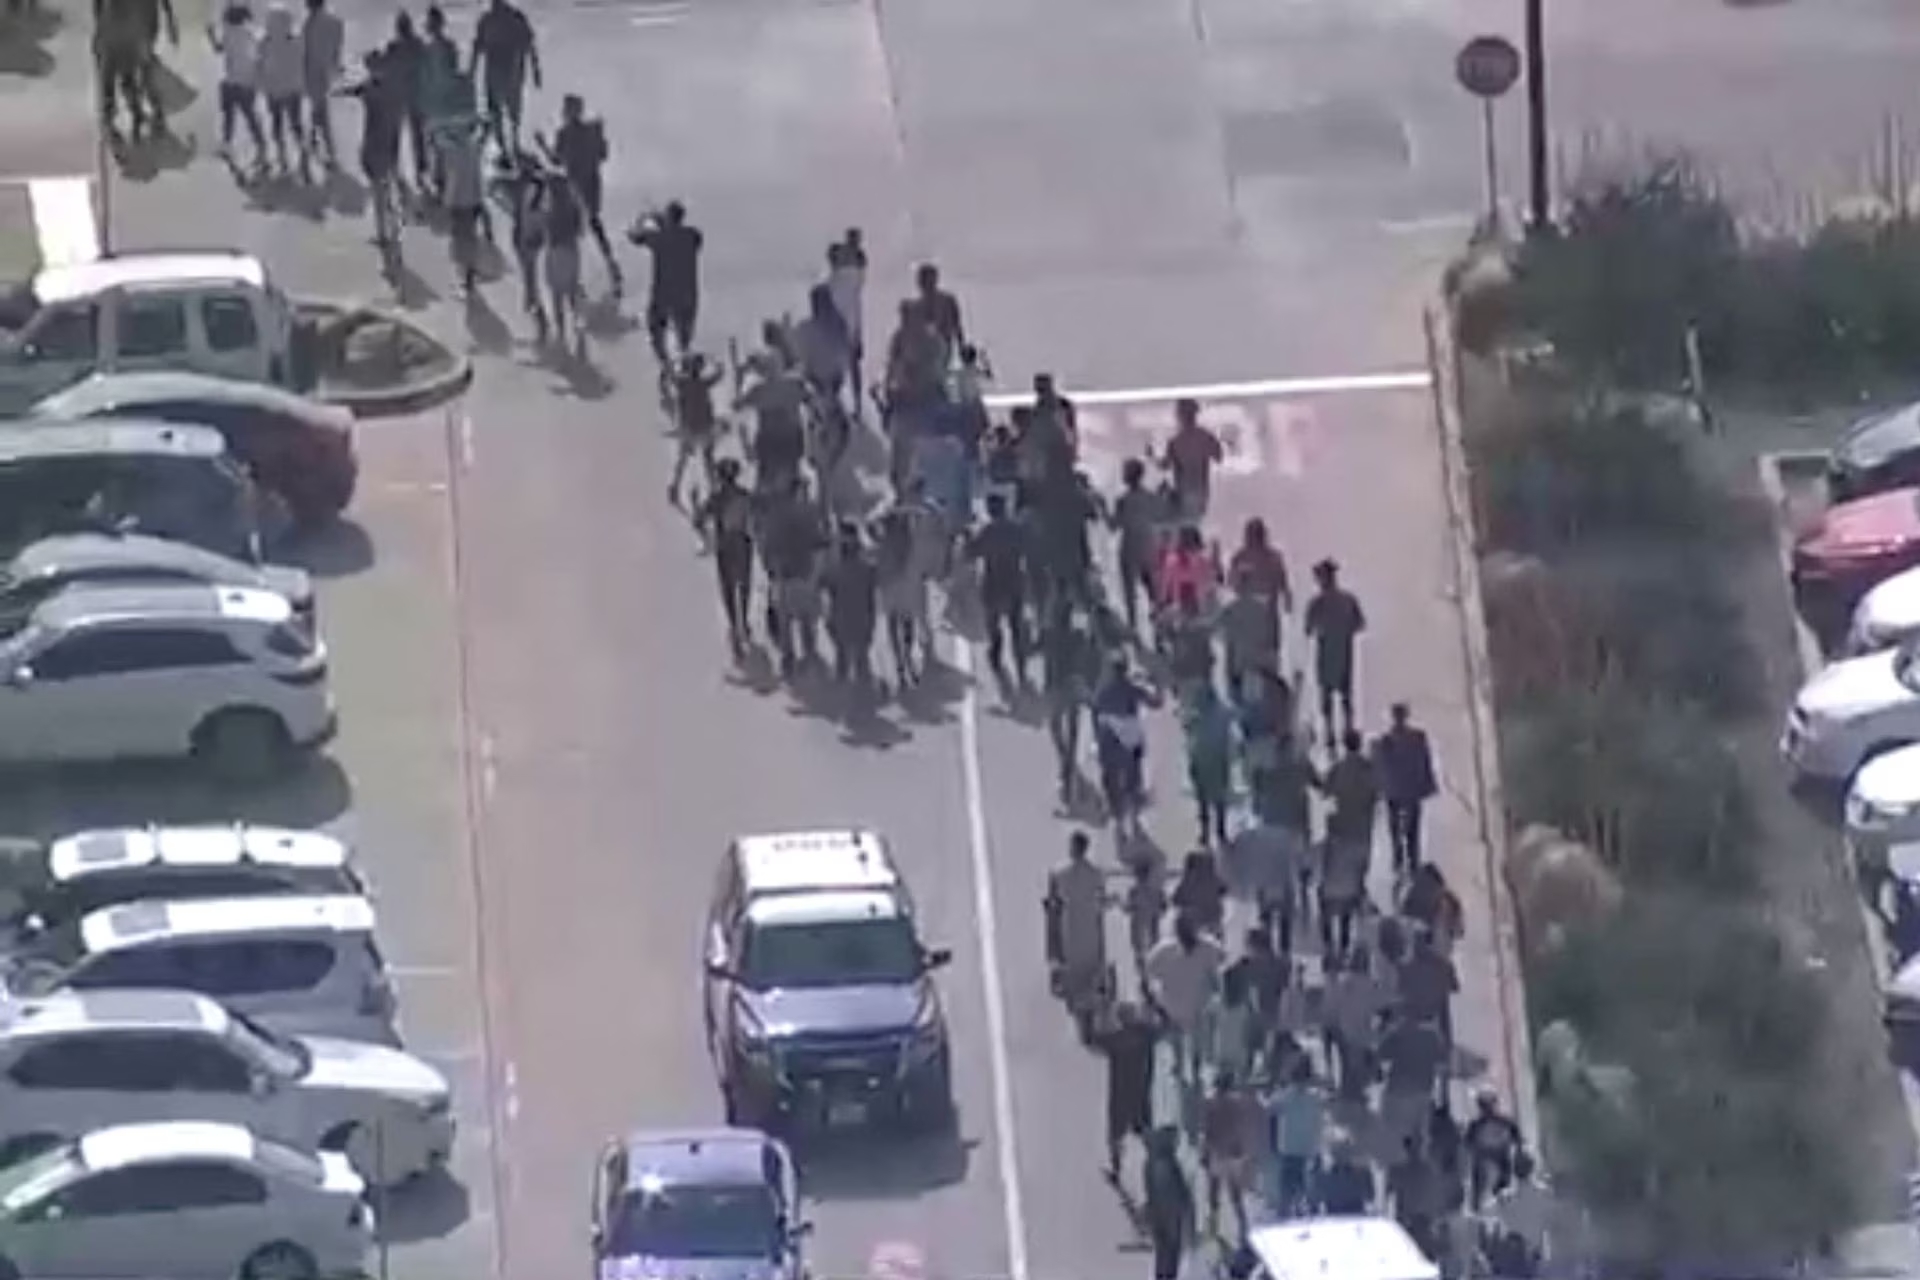 Shoppers leave as police respond to a shooting in the Dallas area's Allen Premium Outlets, which authorities said has left multiple people injured in Allen, Texas, U.S. May 6, 2023 in a still image from video. Photo: Reuters